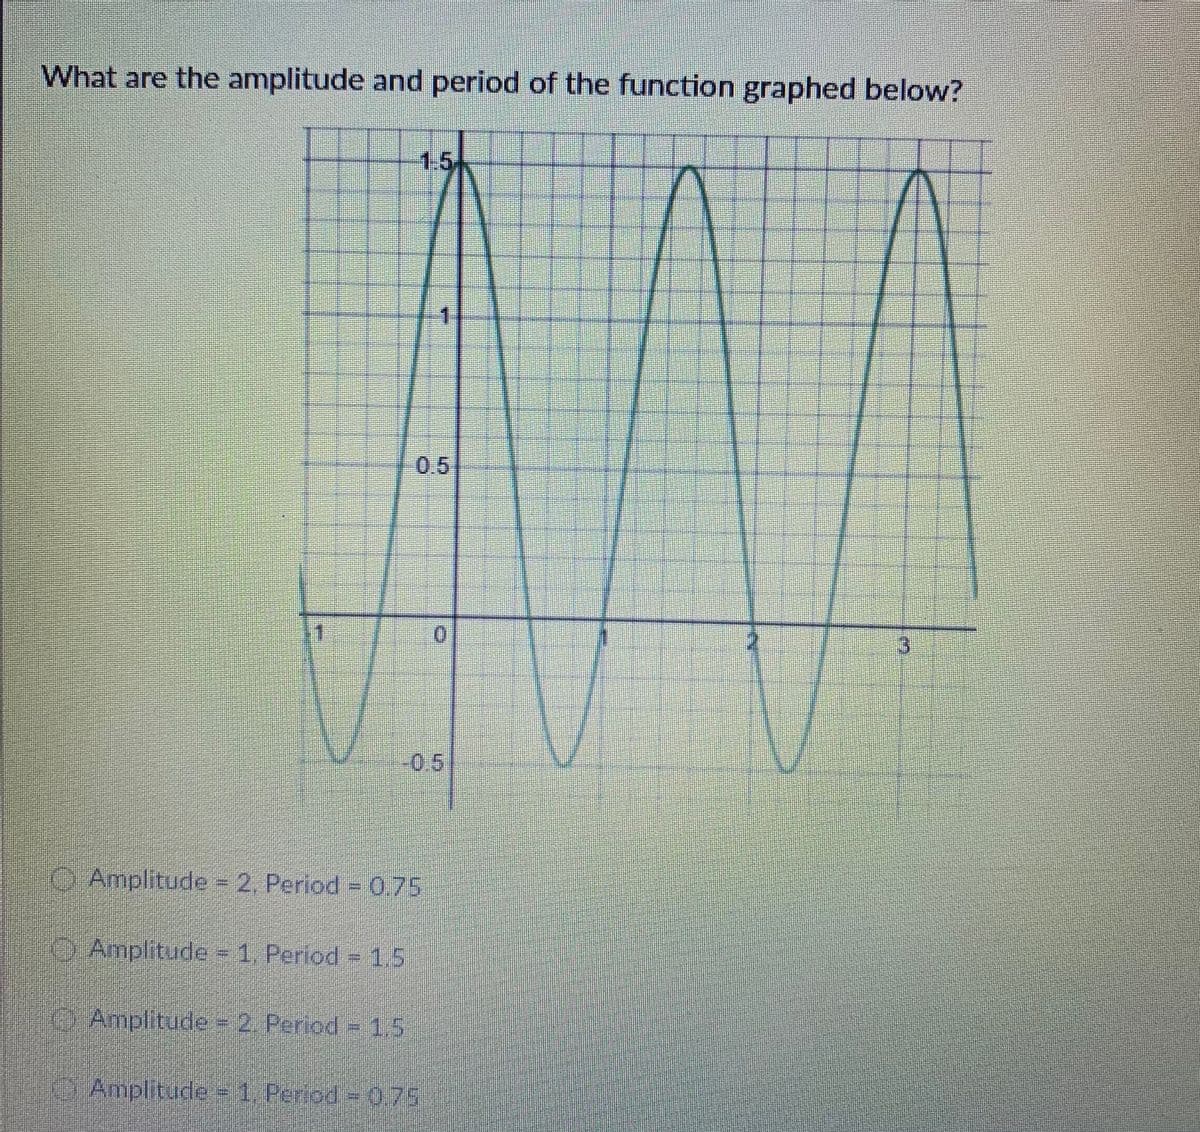 What are the amplitude and period of the function graphed below?
1.5
0.5
1.
3.
-0.5
O Amplitude - 2, Period 0.75
OAmplitude - 1. Period 1,5
Amplitude - 2. Period = 1,5
Amplitude 1 Peried = 0.75
